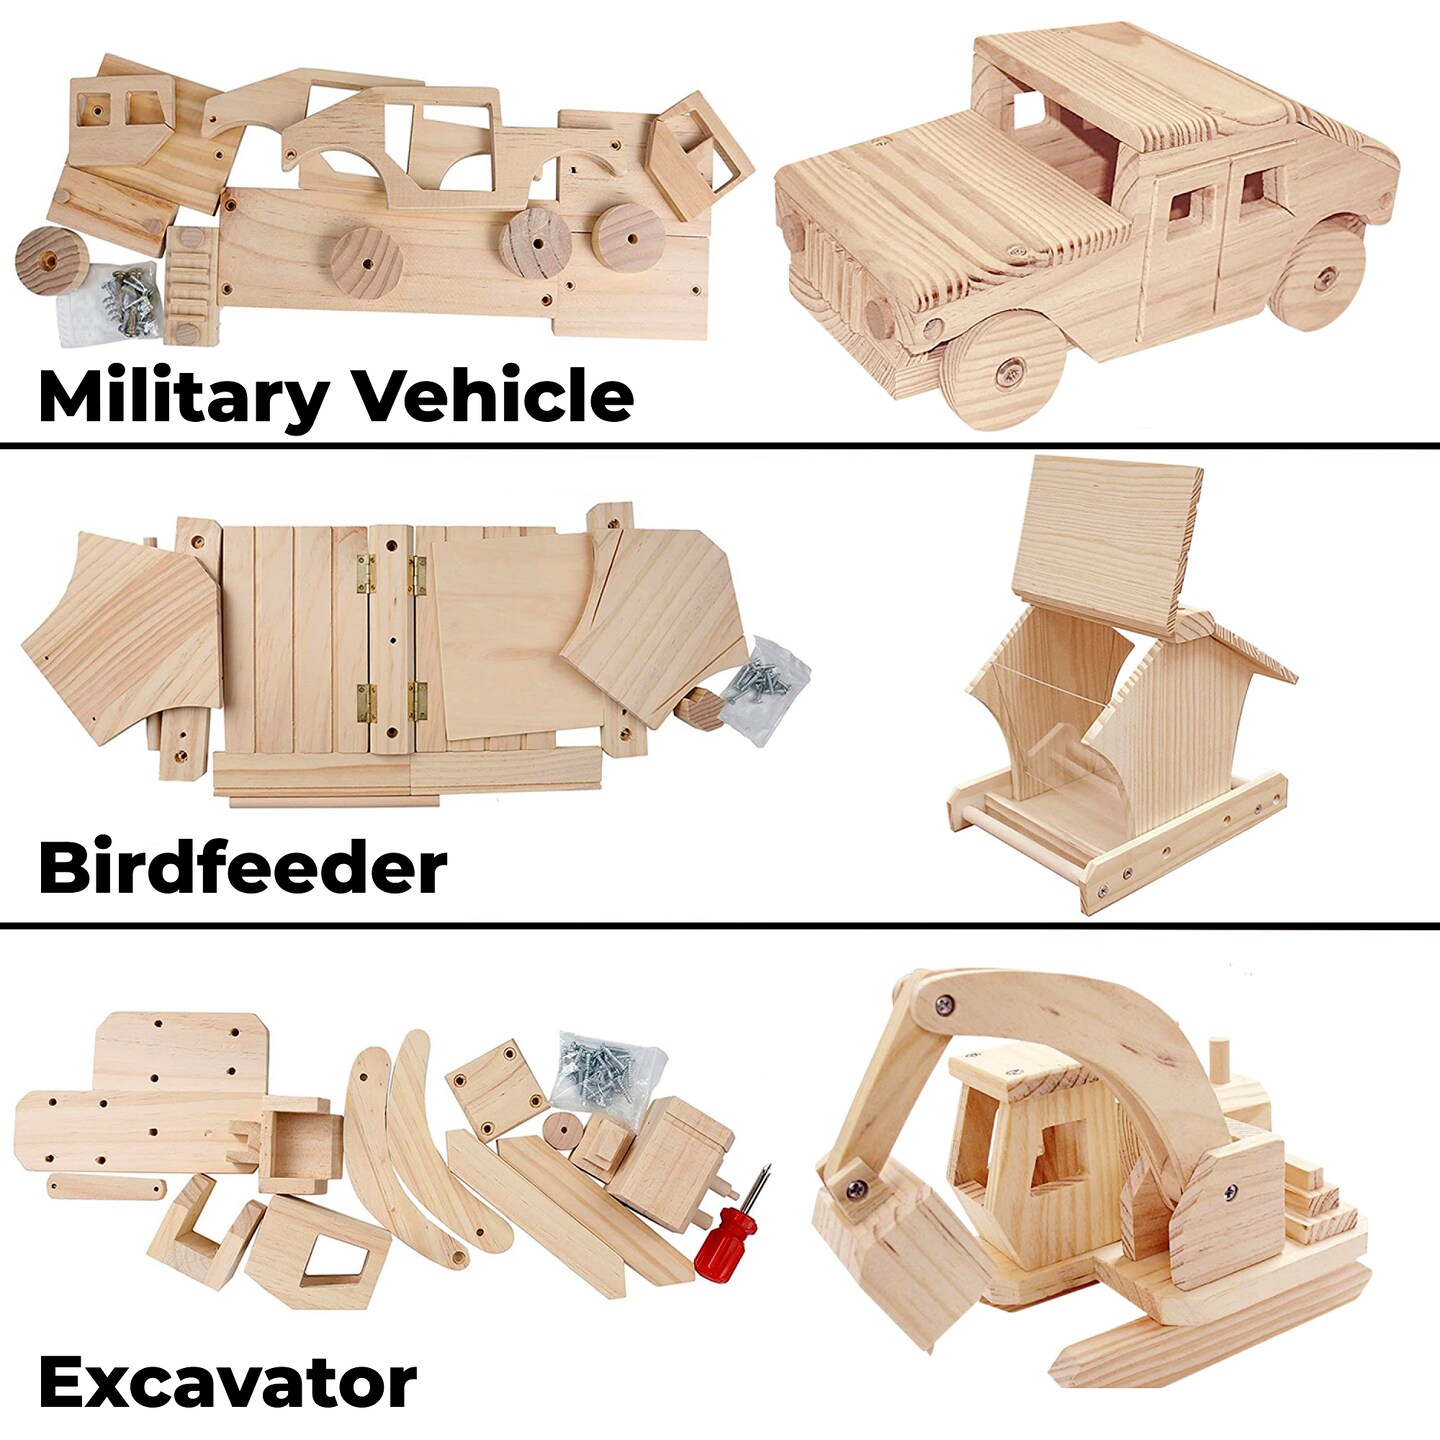 Kraftic Woodworking Building Kit for Kids and Adults, 3 Educational DIY Carpentry Construction Wood Model Kit STEM Toy Projects for Boys and Girls - Wooden Military Vehicle, Excavator and Bird-Feeder